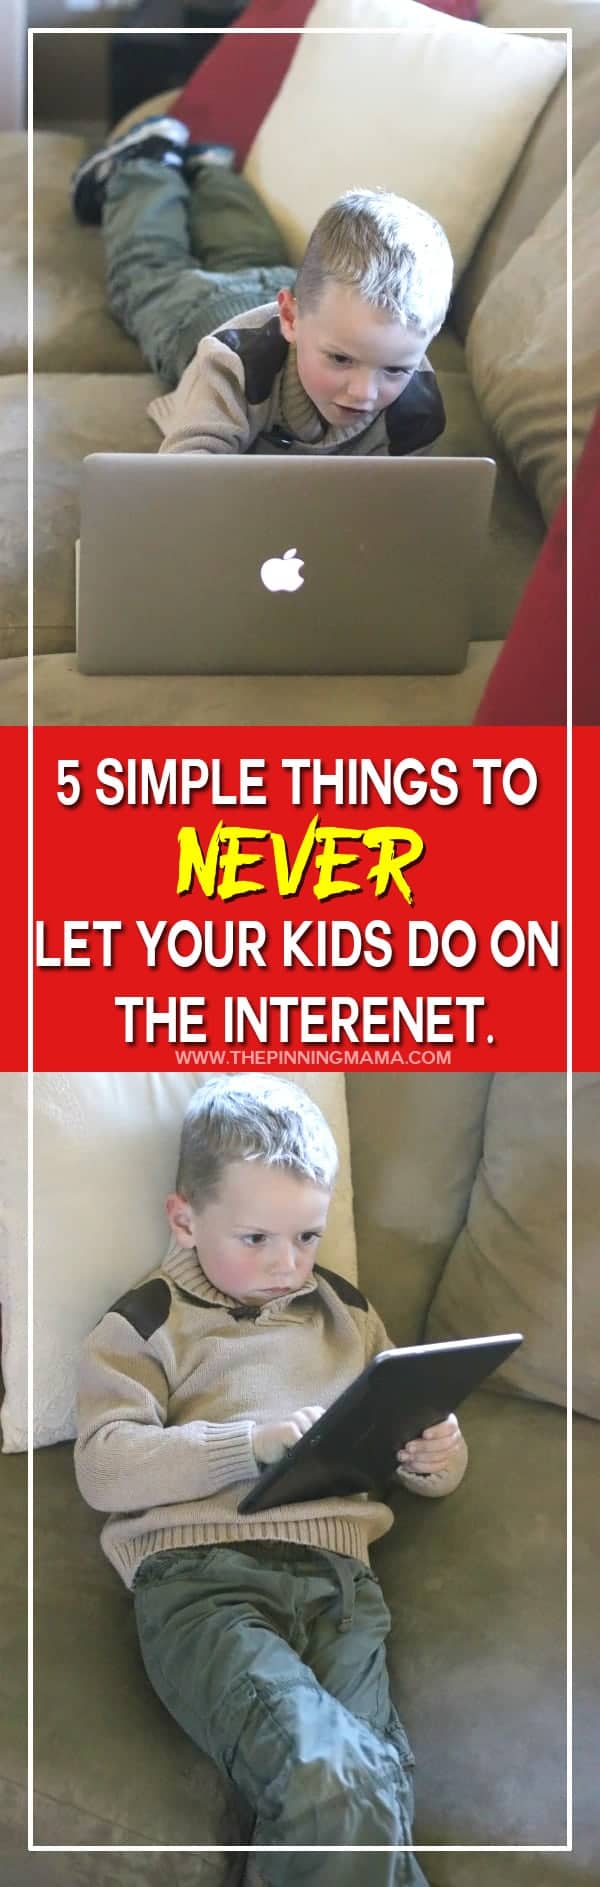 Are you doing any of these?  Such easy ways to make sure your kids stay safer on the internet.  I never thought about number 2 but it is so smart!